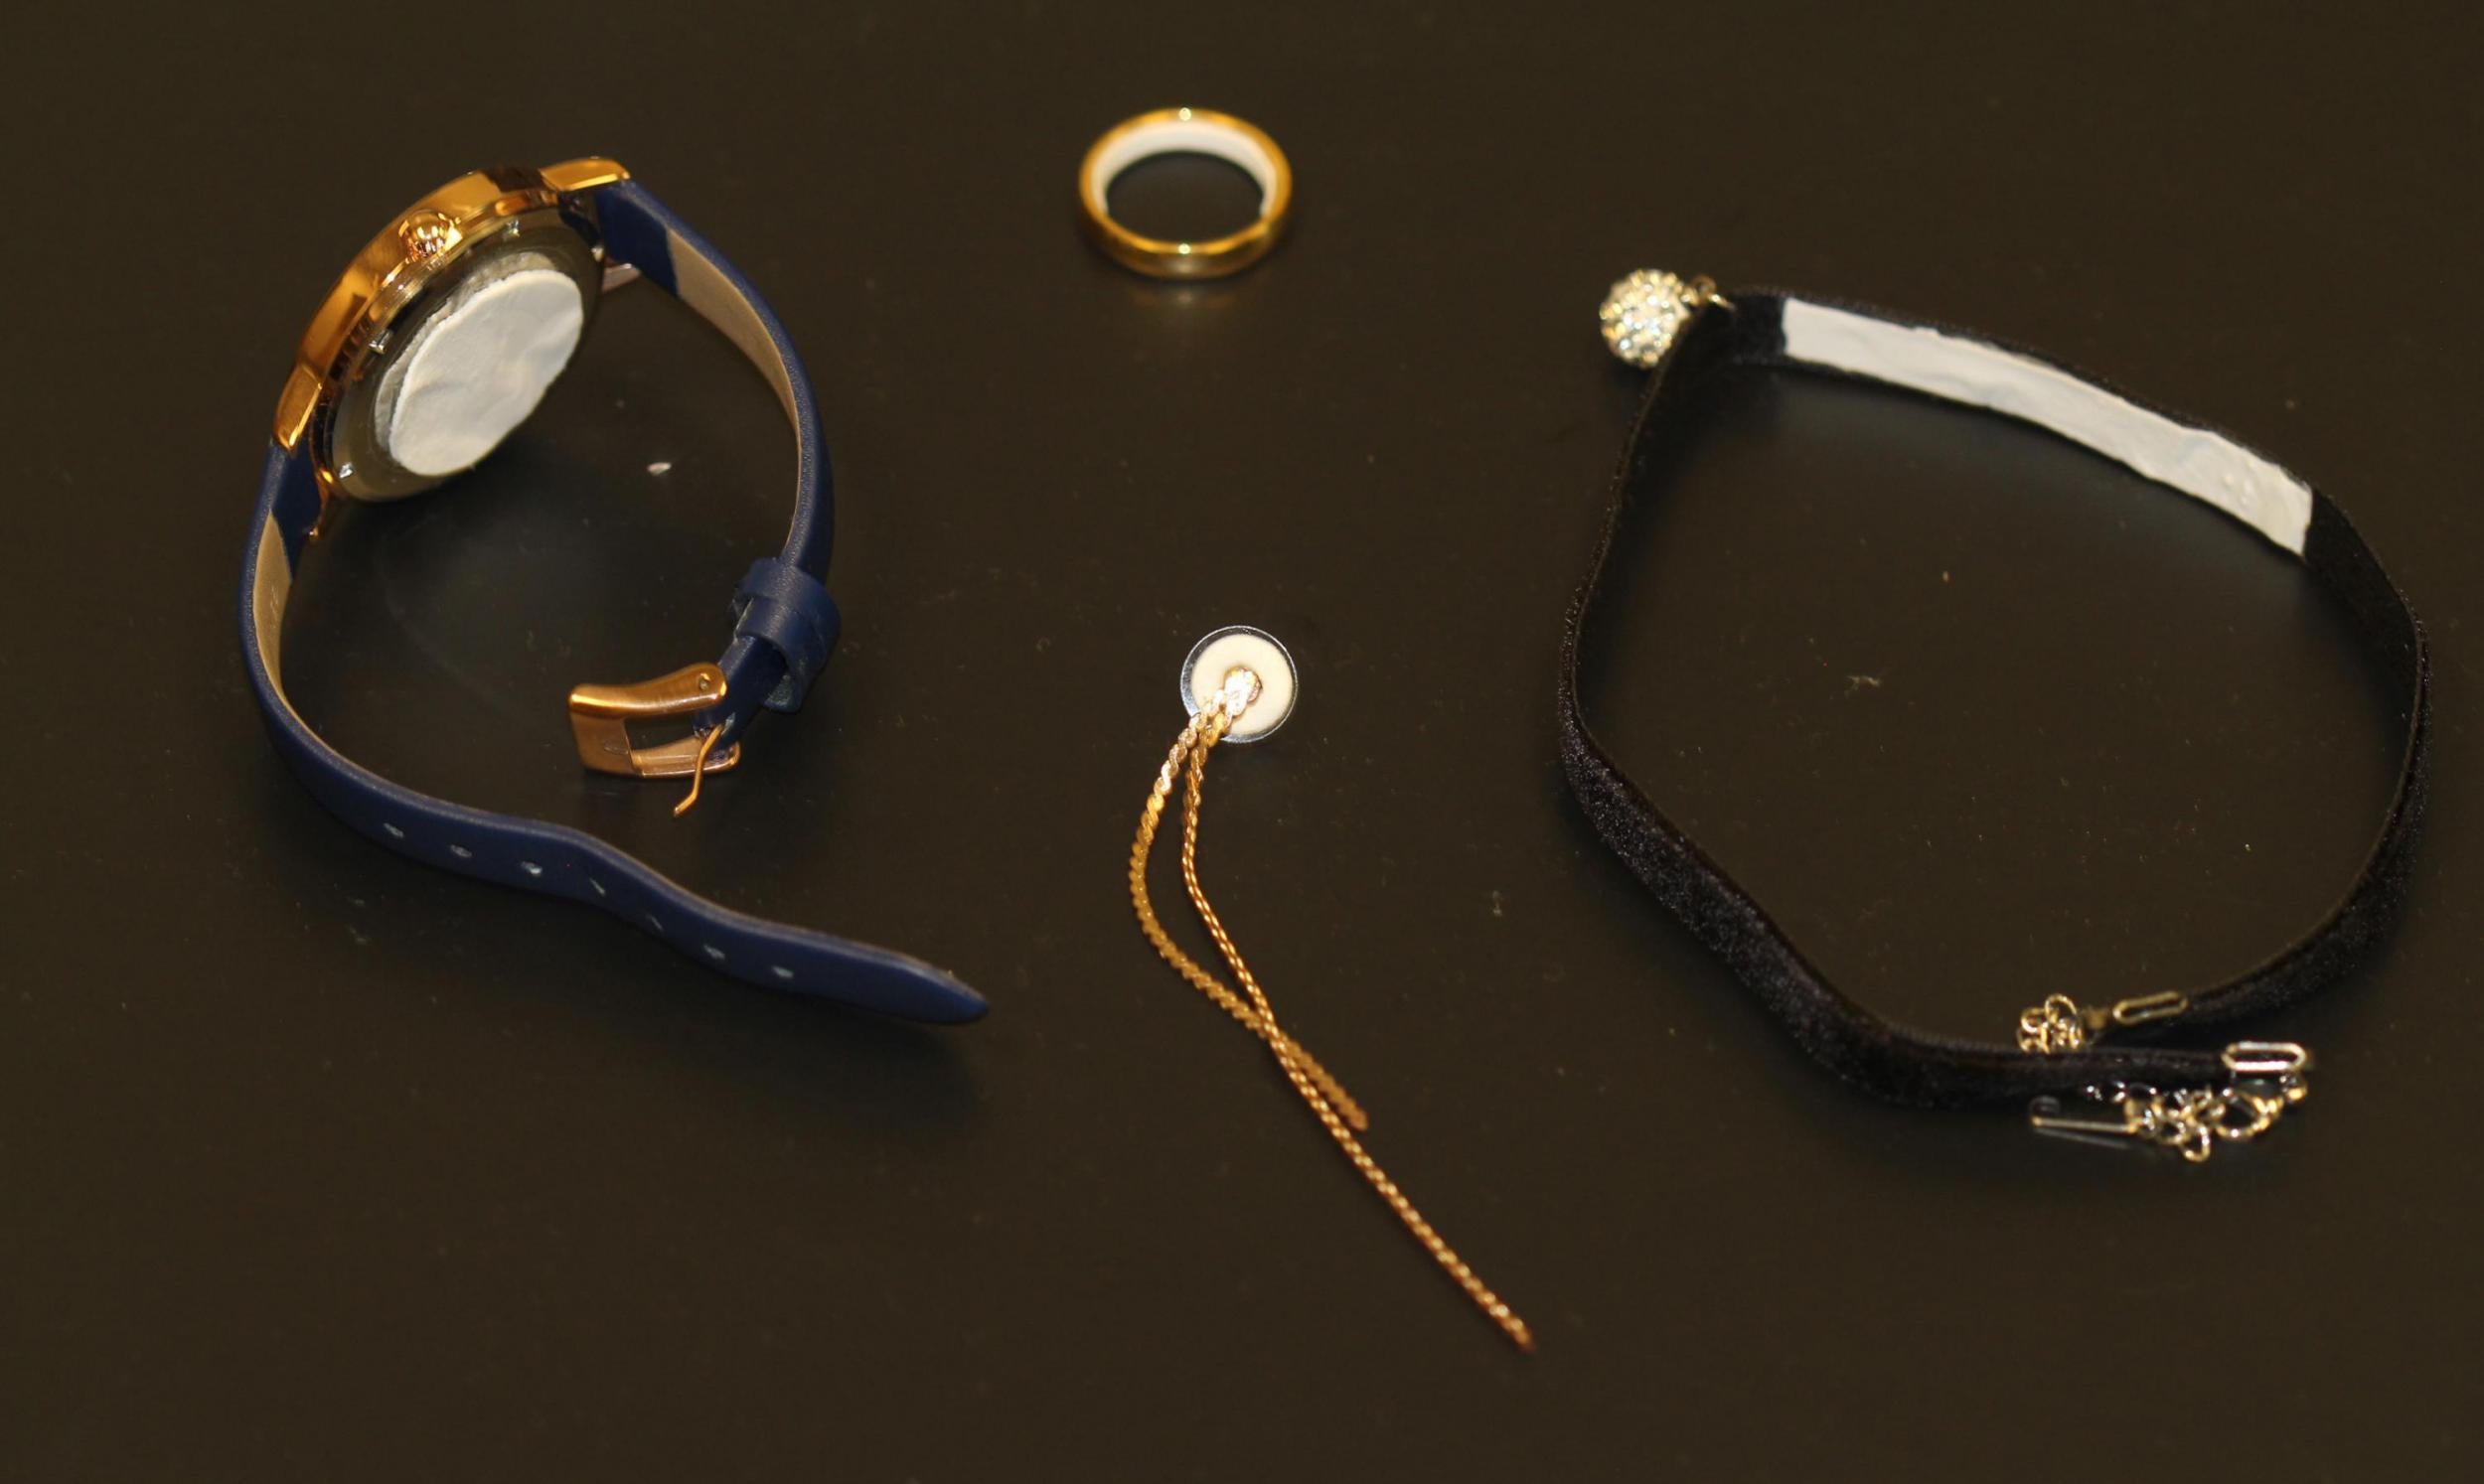 Image shows potential contraceptive jewellery, in clockwise order, a pharmaceutical watch, ring, choker necklace and earring. In each case, a white contraceptive patch material is applied to a part of the jewellery that would be in contact with the skin.